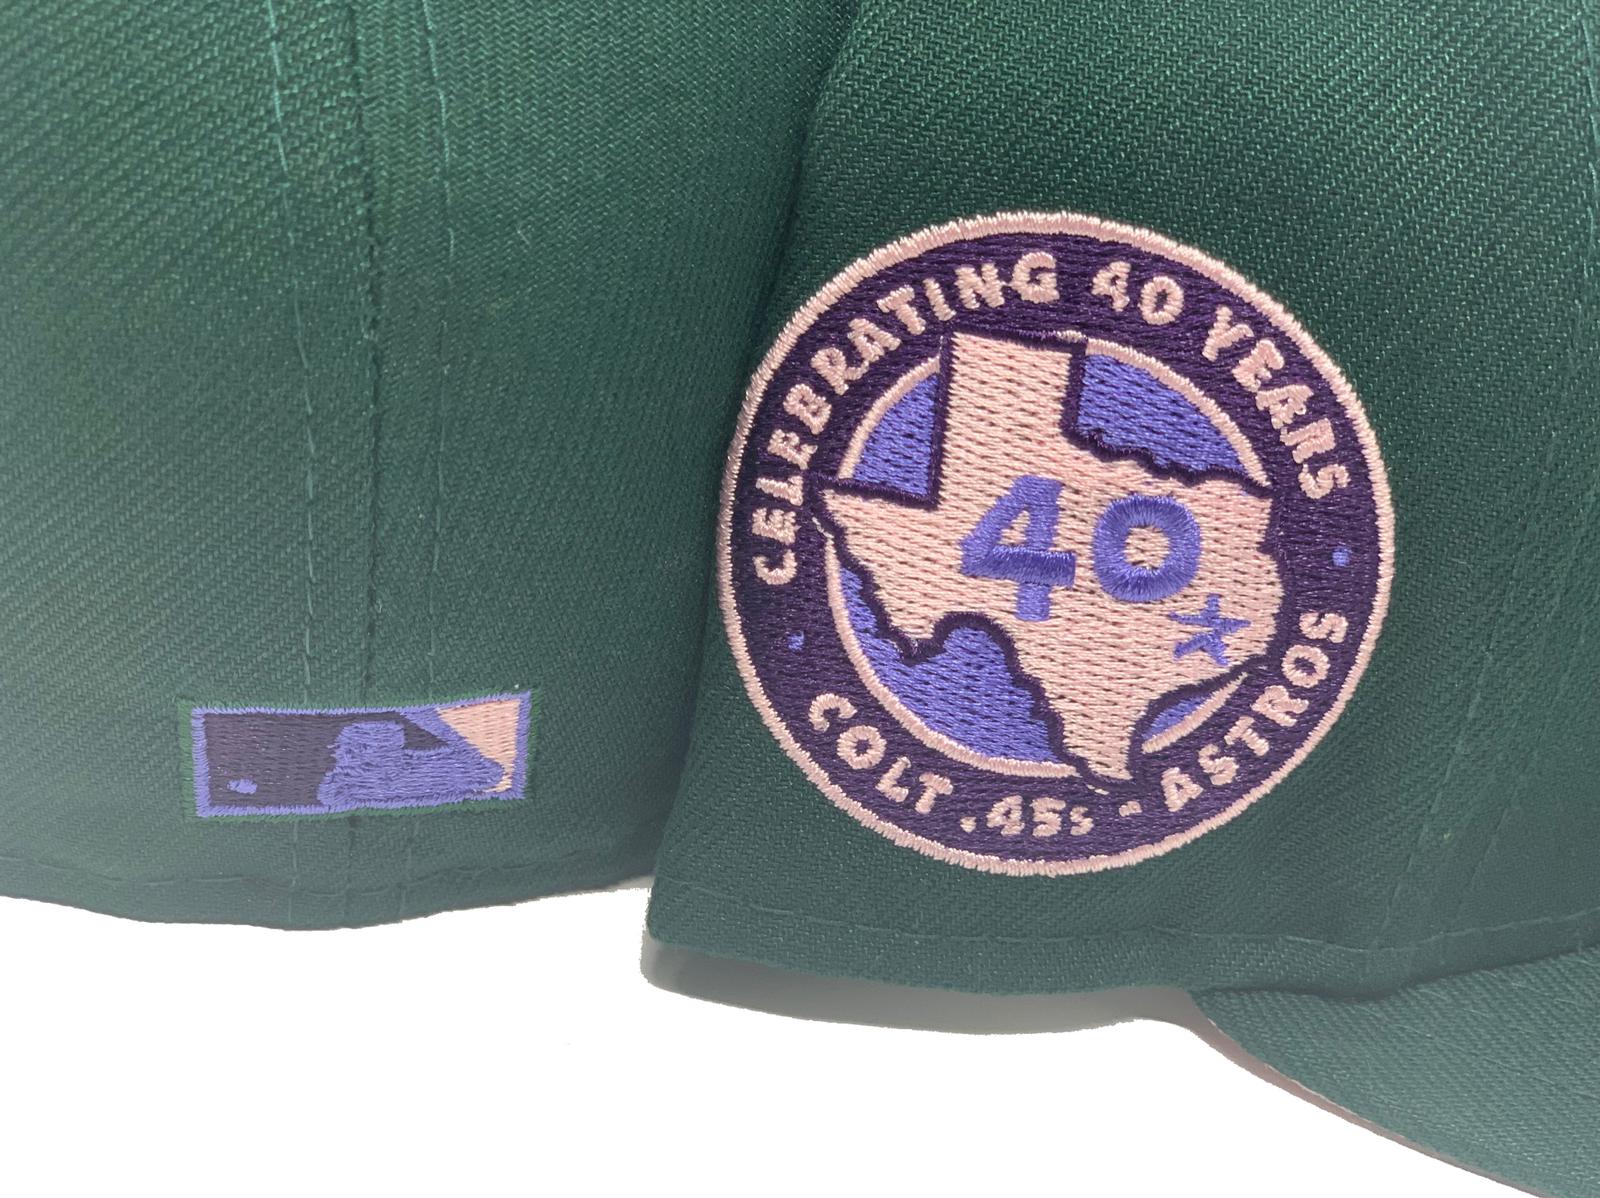 Houston Astros on X: Here's a closer look at the #Astros special  #StPatricksDay green caps. #AstrosST  / X